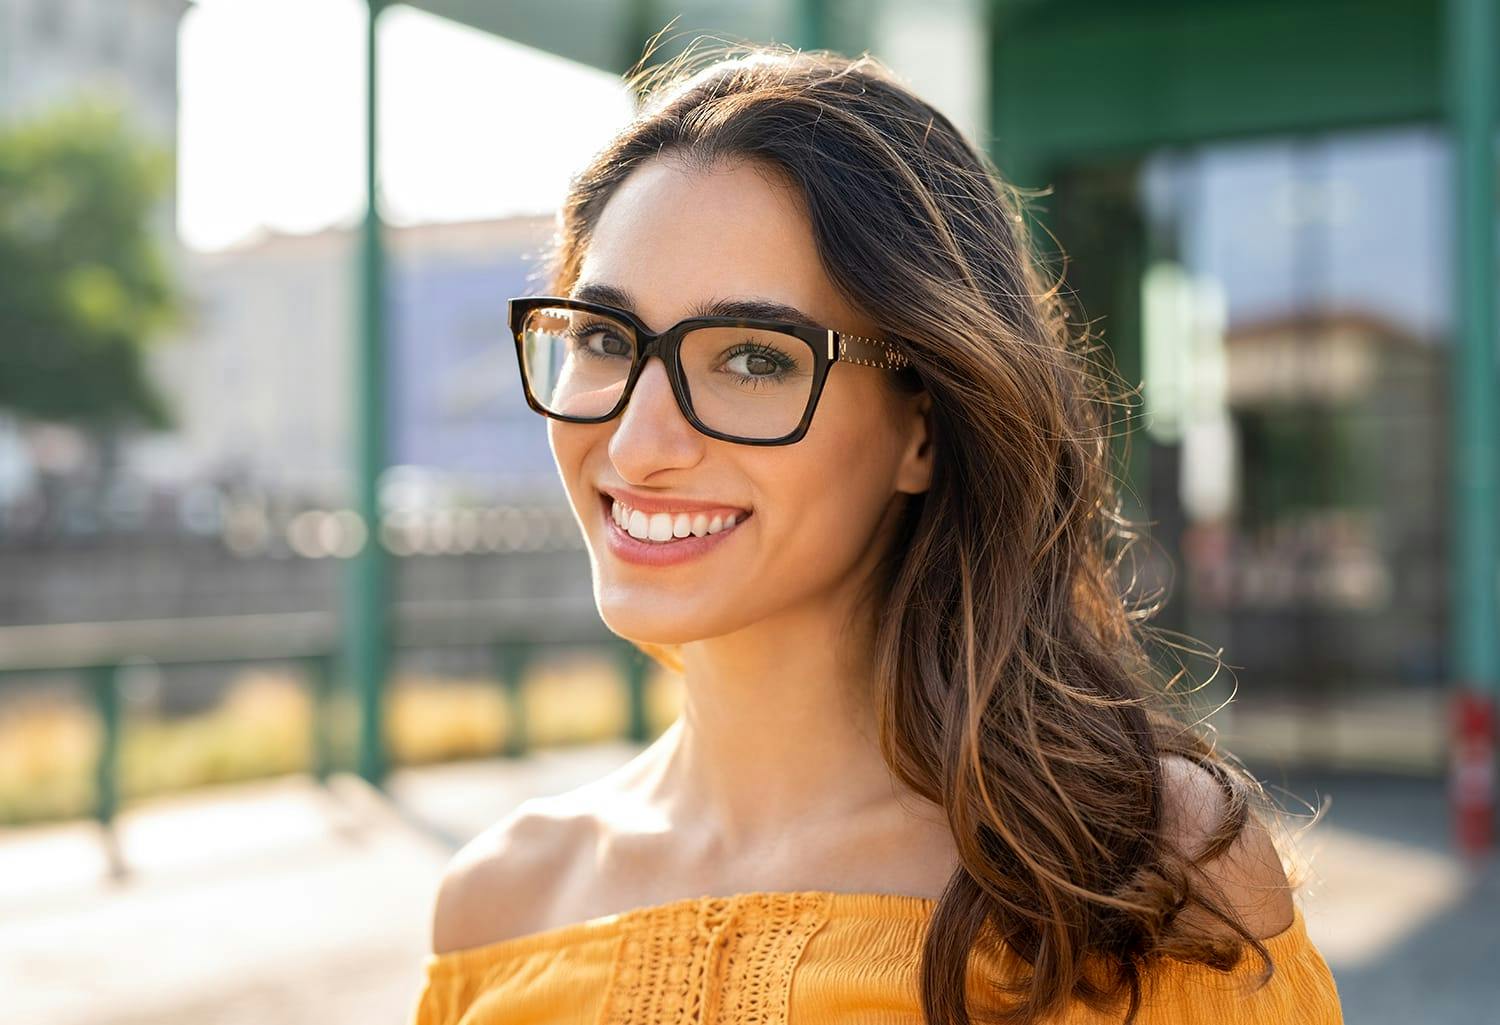 Woman in glasses and a yellow shirt